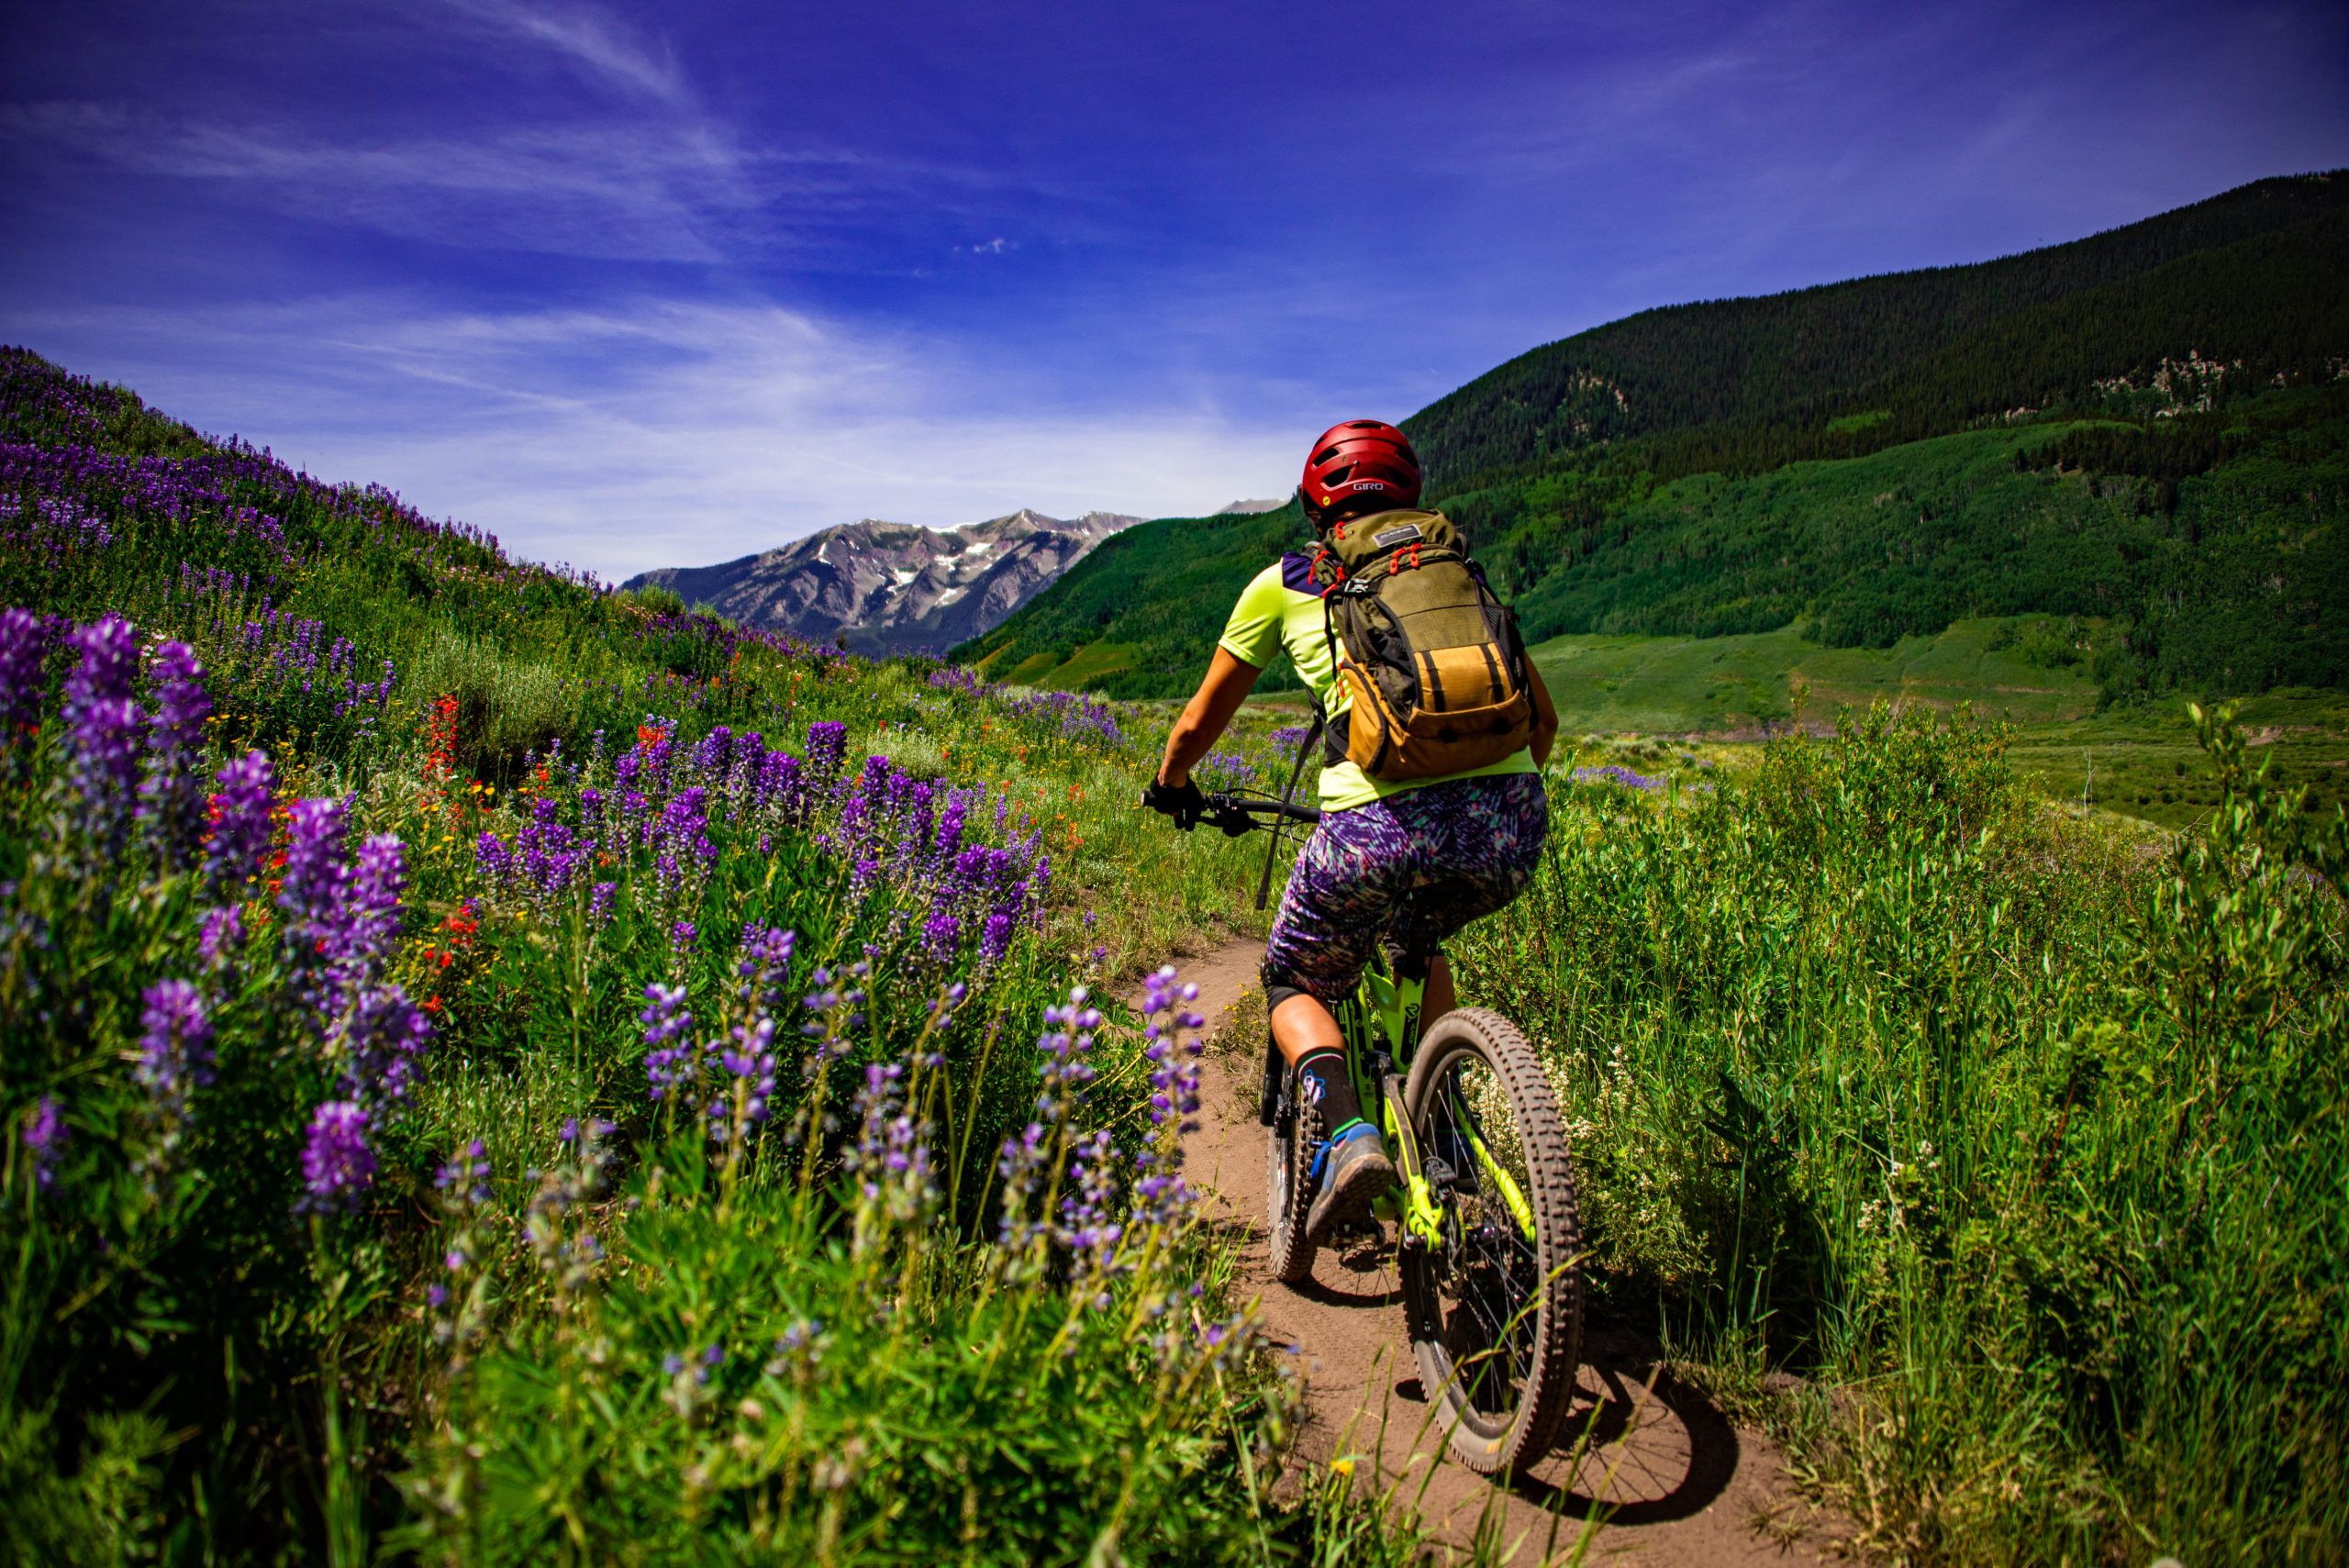 MTB through lupine wildflowers on a sunny summer day in the mountains.